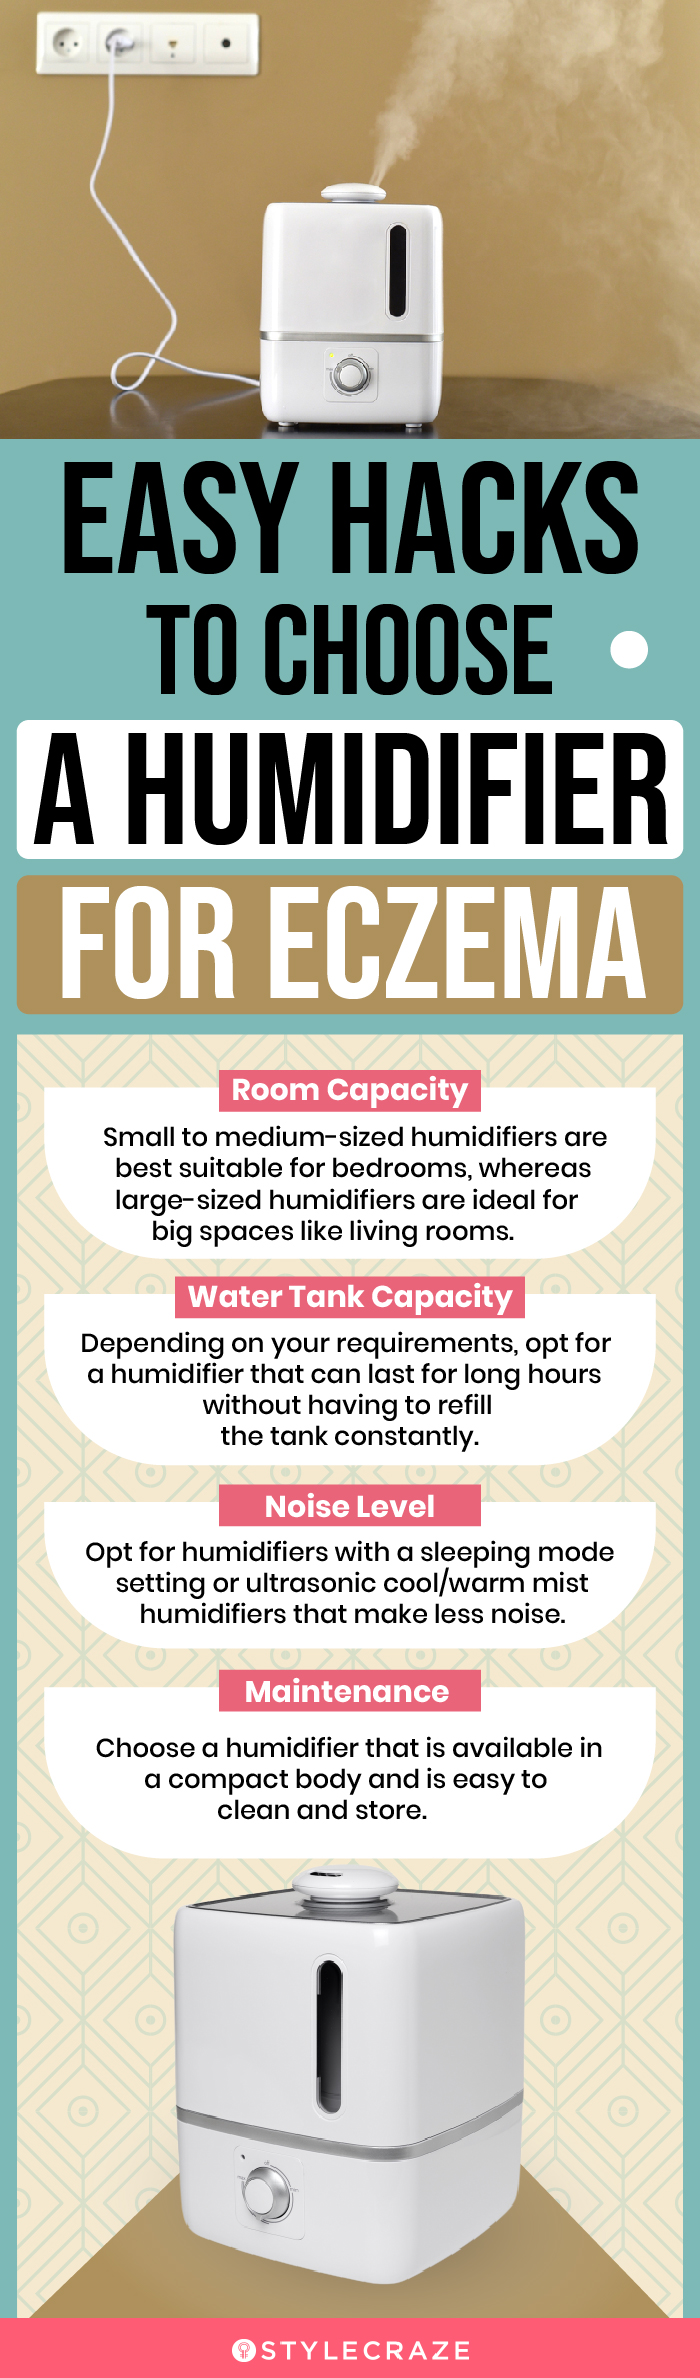 Hacks To Choose A Humidifier For Eczema (infographic)